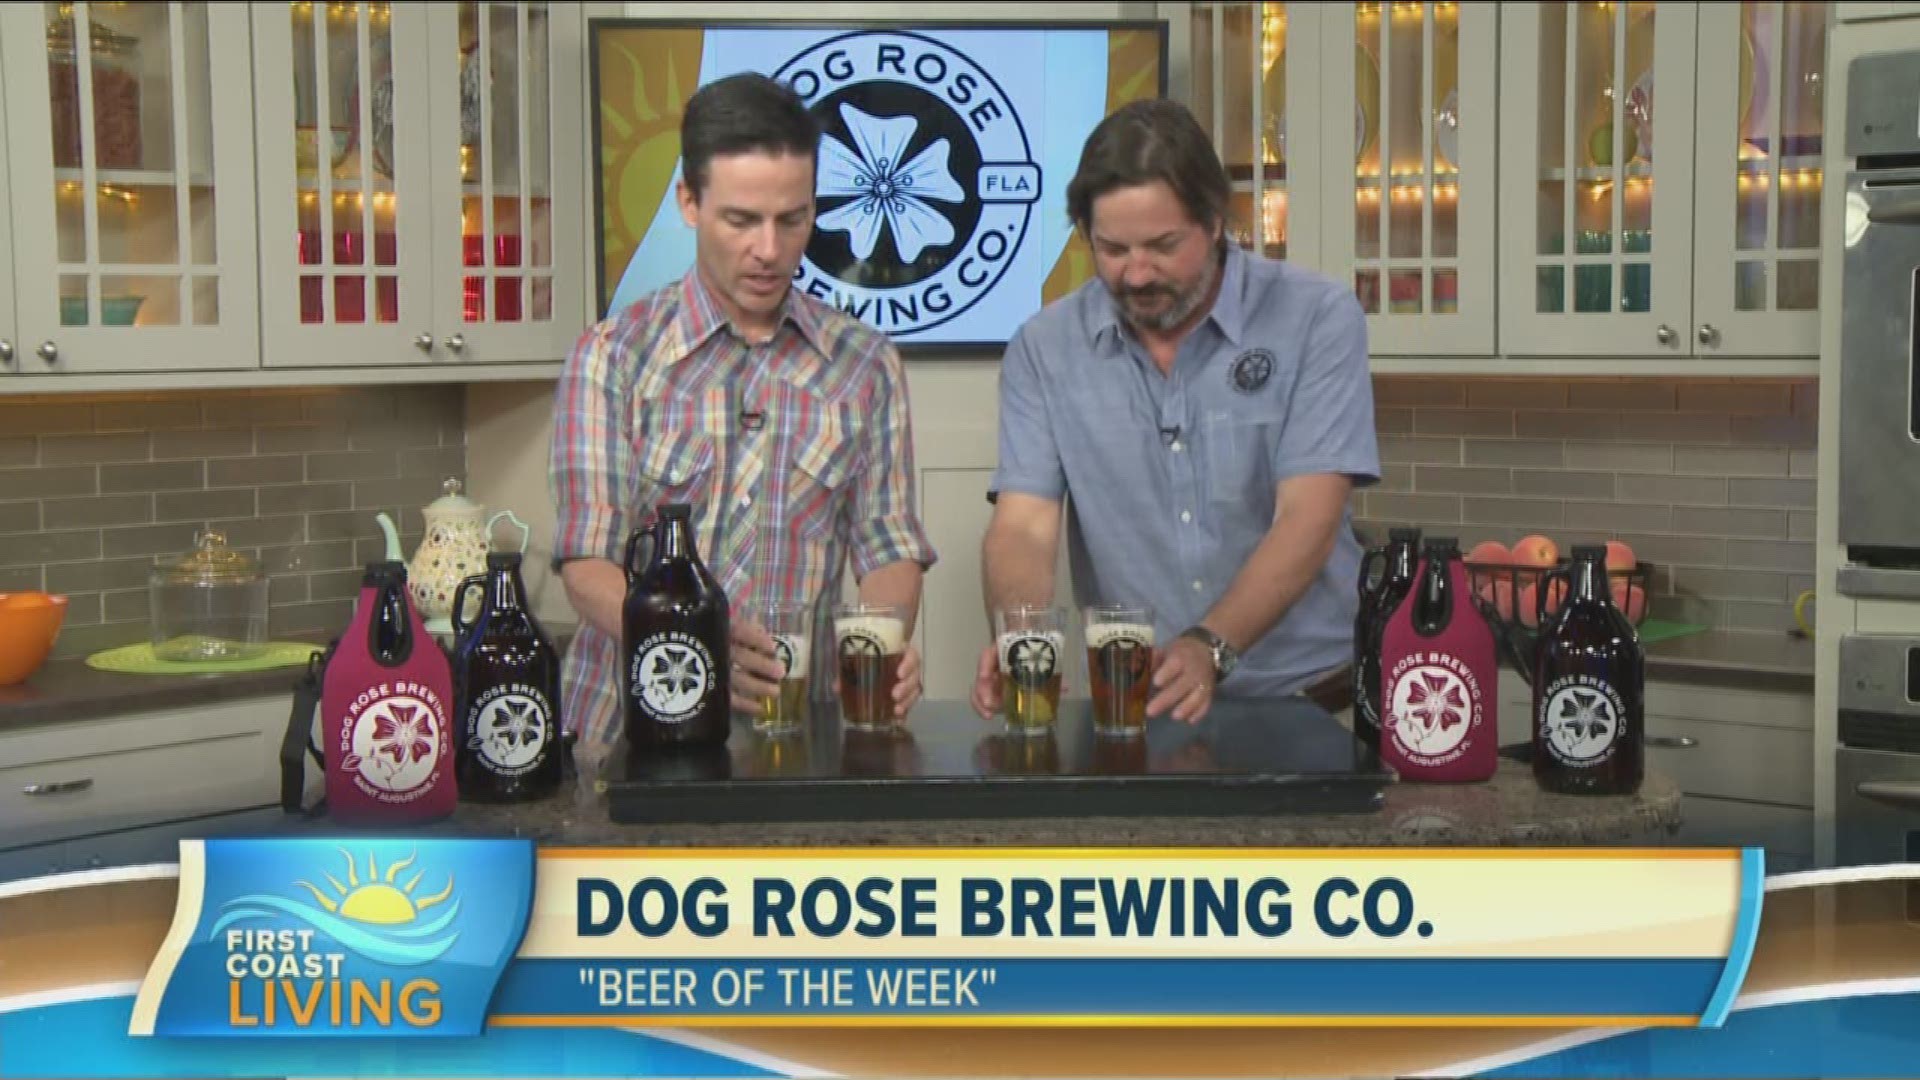 Take a trip through your taste buds to the oldest city with this week's pick of Beer of the Week -- Dog Rose Brewing Co.